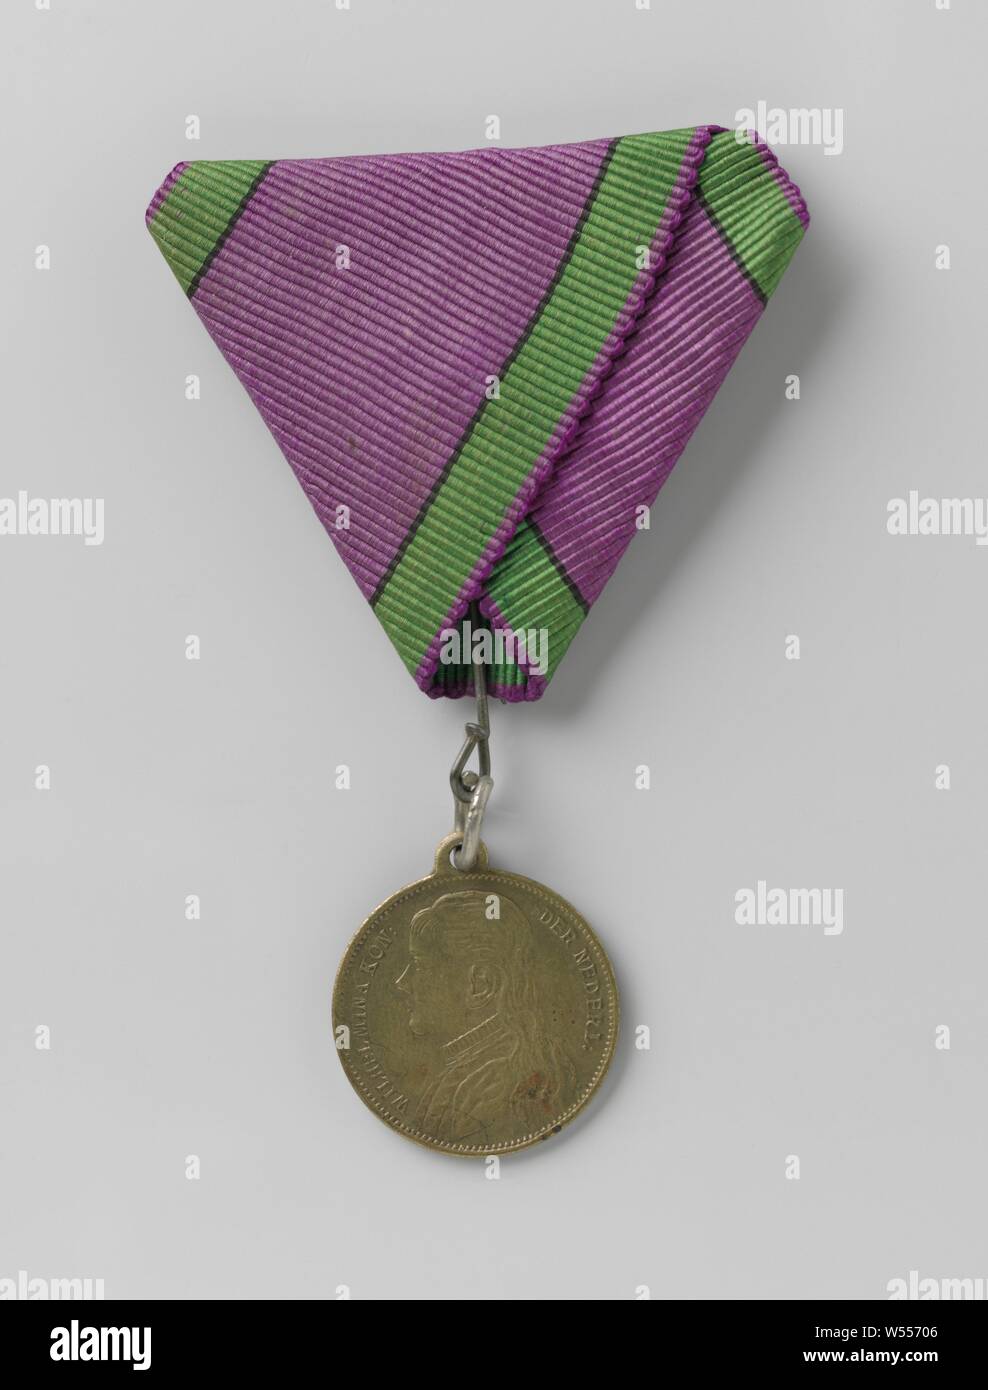 Archer's medal with Wilhelminamunt, medallion on the eyelet and purple ribbon with green stripes on either side Front portrait of Wilhelmina and profile to the left with a text. Backside two crossed guns with a target in the middle surrounded by laurel branches, Wilhelmina (Queen of the Netherlands), anonymous, Netherlands, c. 1890 - c. 1910, bronze (metal), textile materials Stock Photo